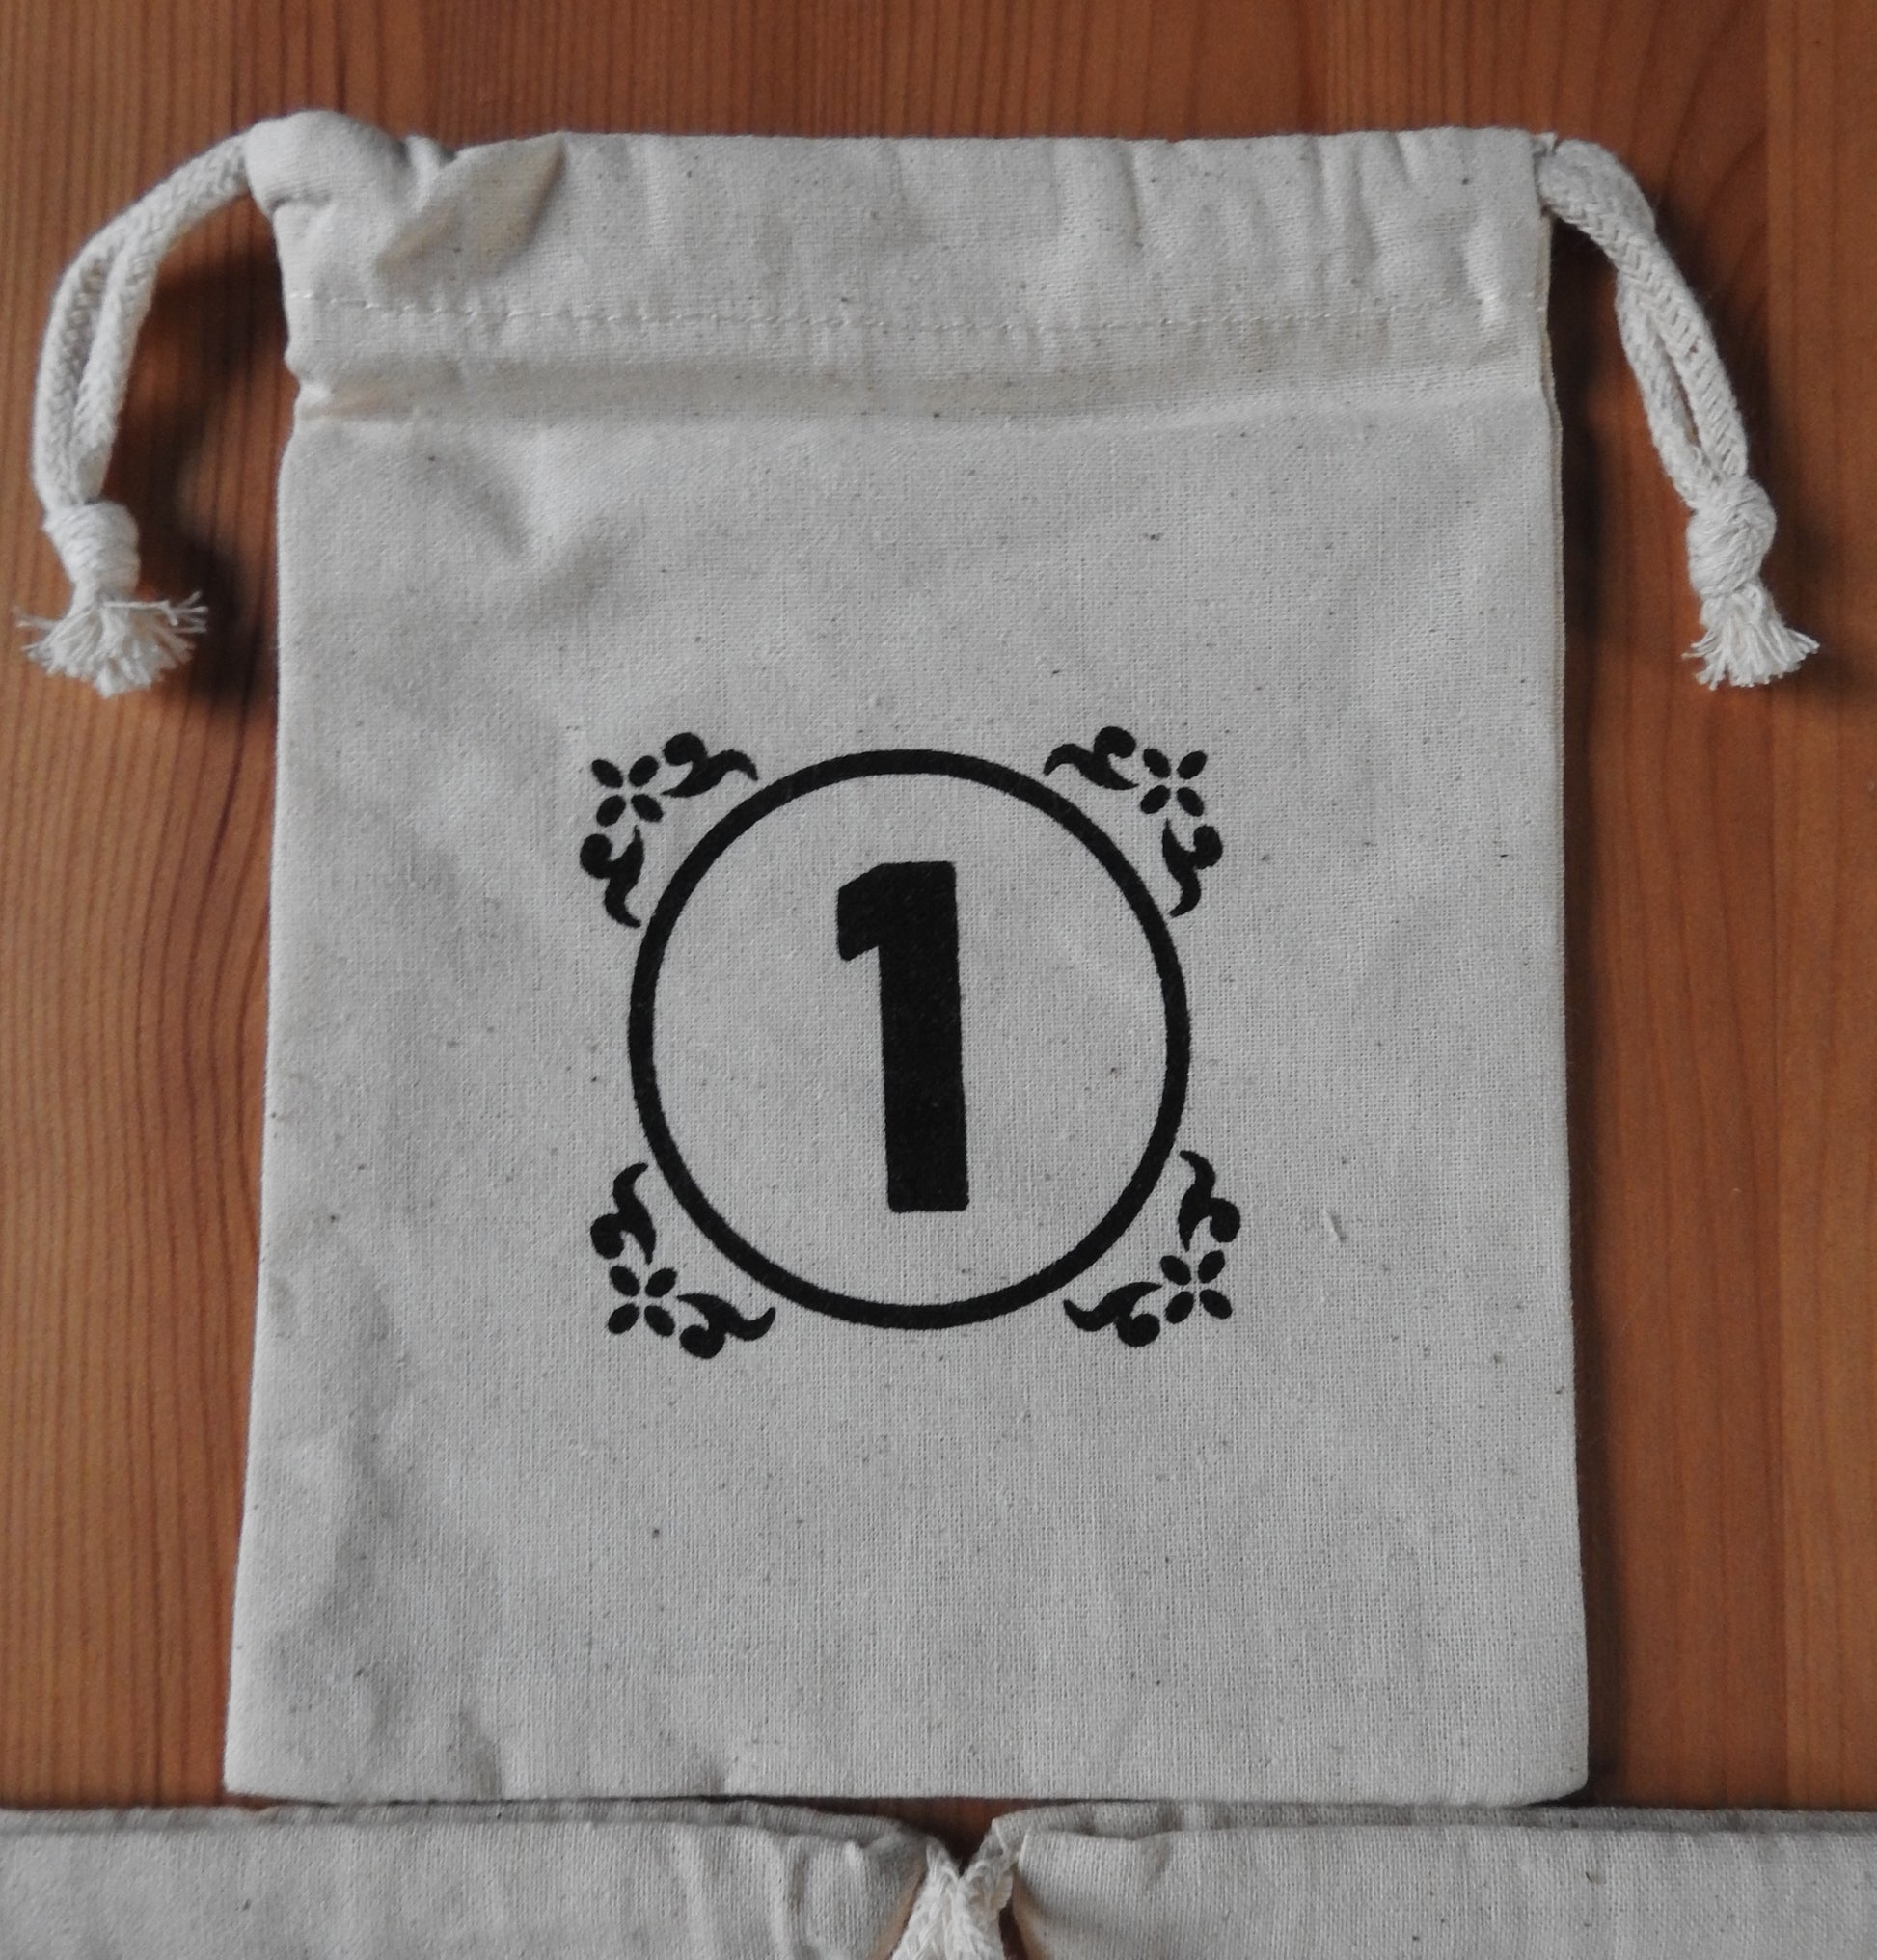 View of the first bag numbered 1 from this Great Western Trail 3 Tile Bags accessory.